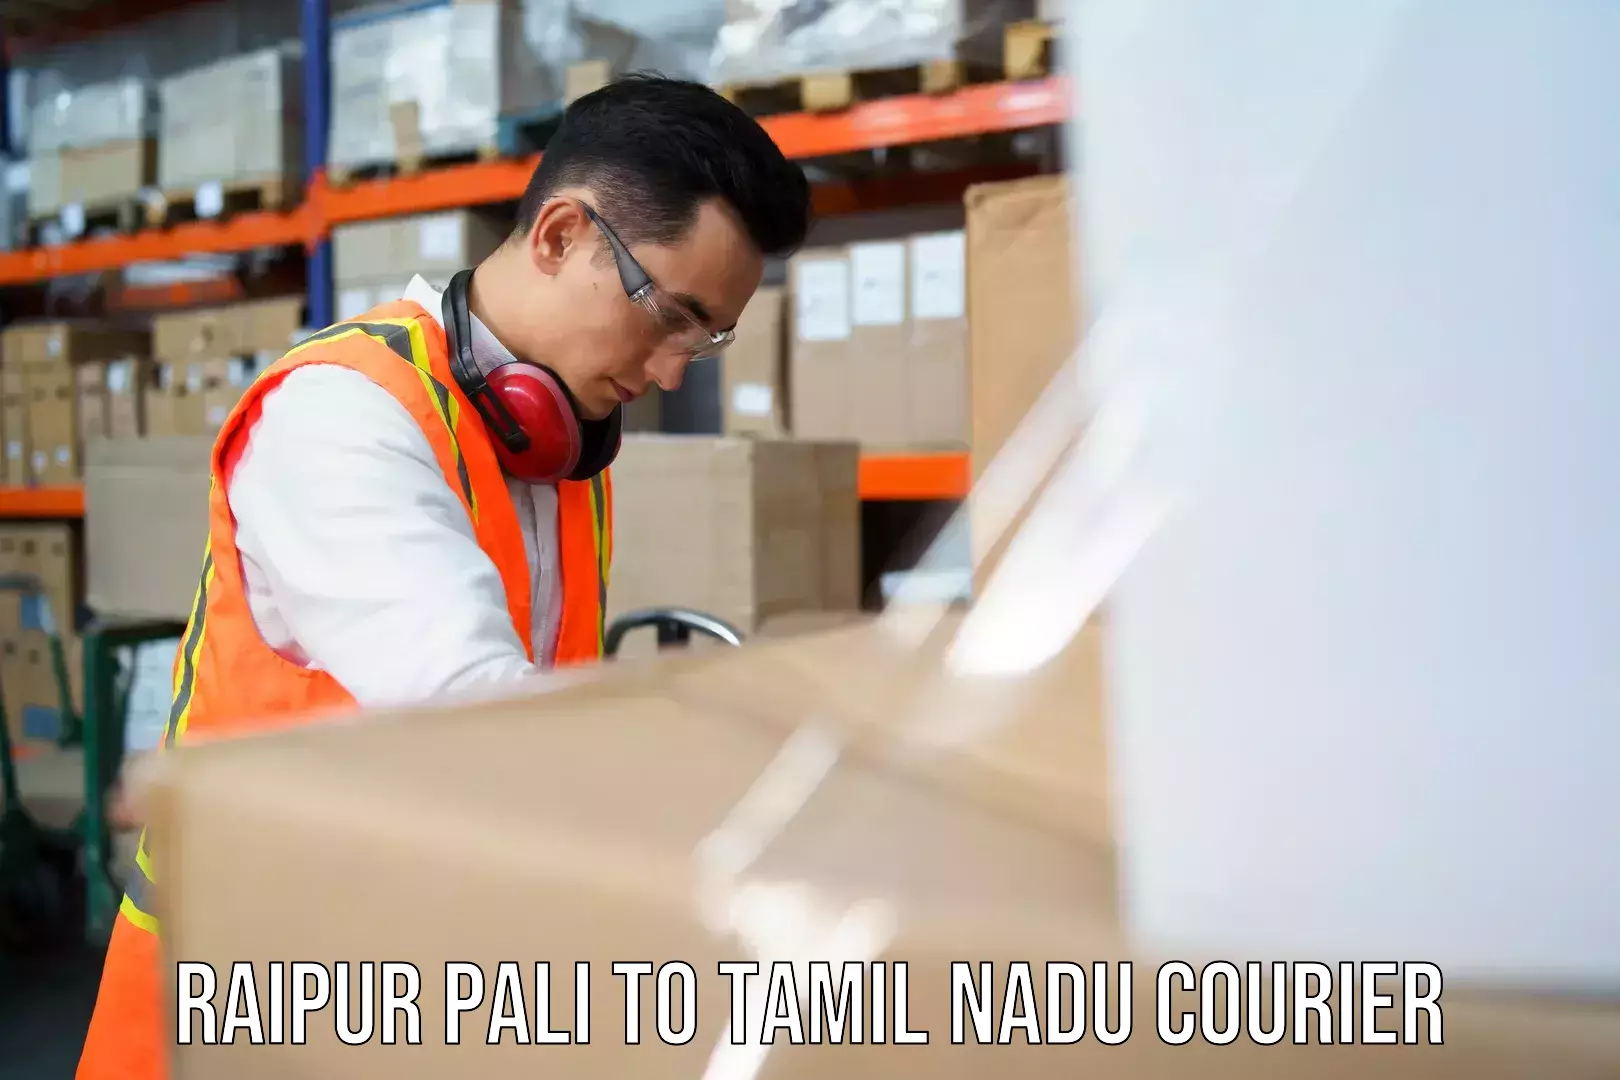 Reliable courier service Raipur Pali to Tamil Nadu